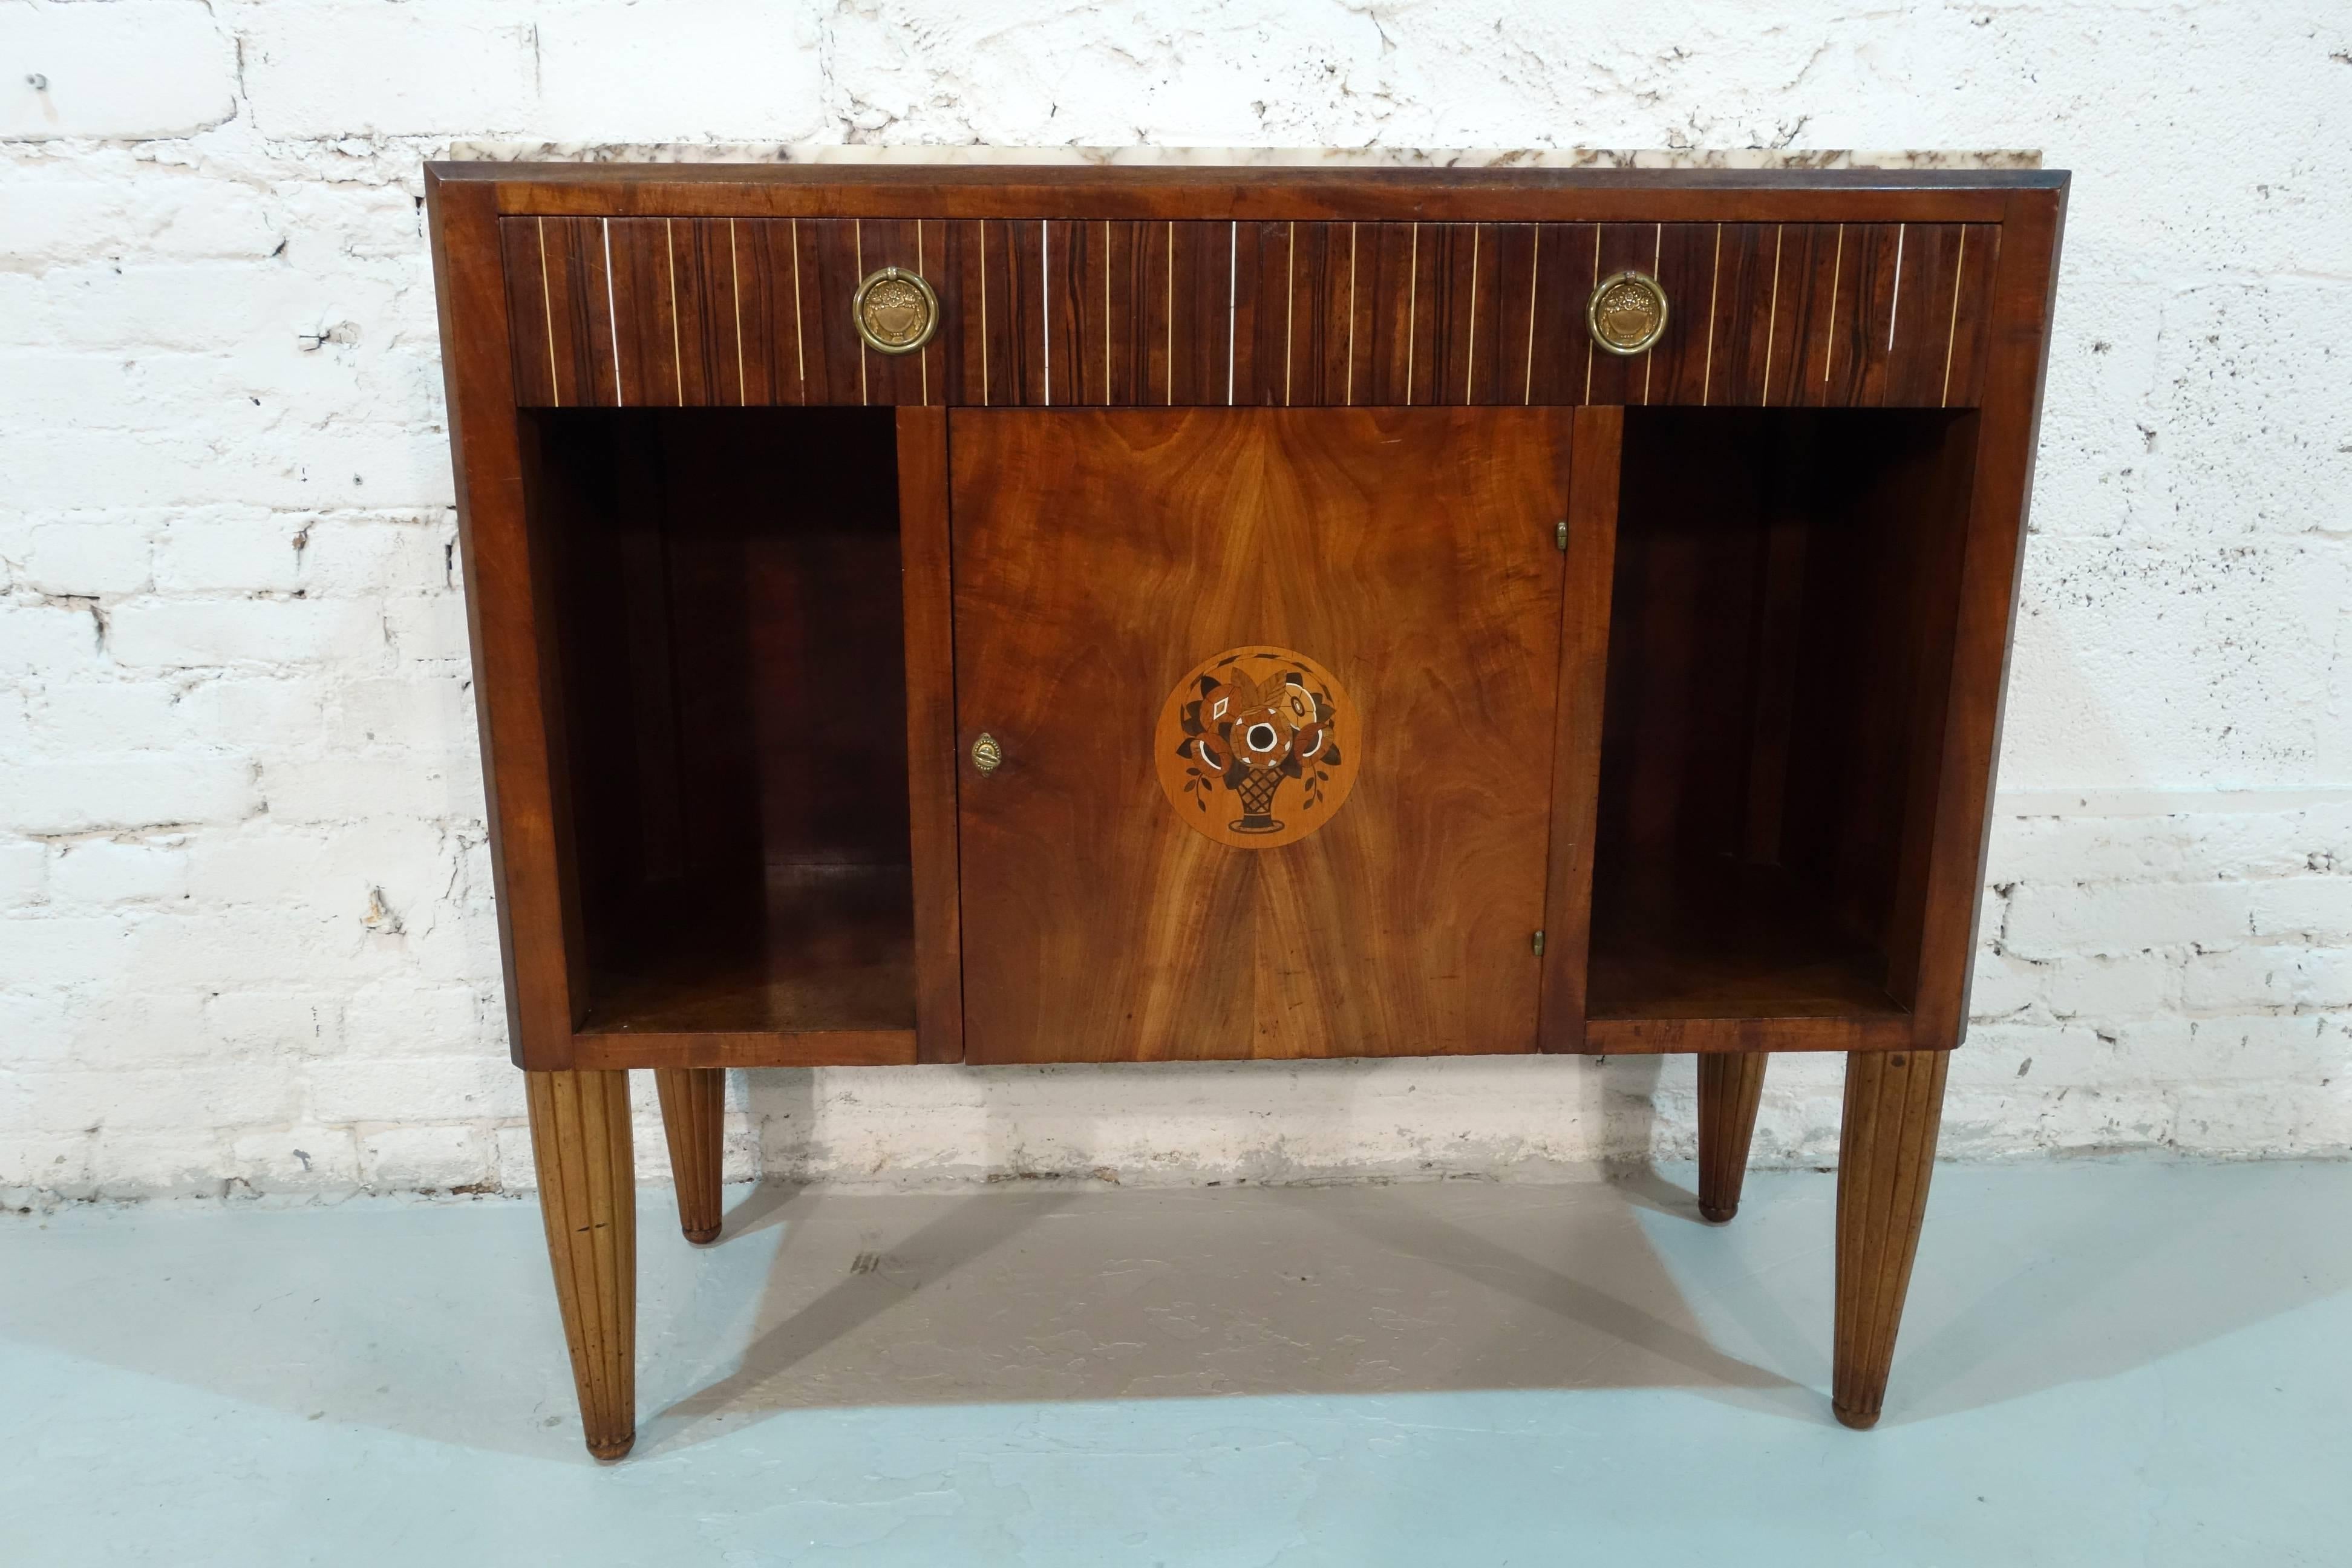 Signed French Art Deco Dresser by Roche 1